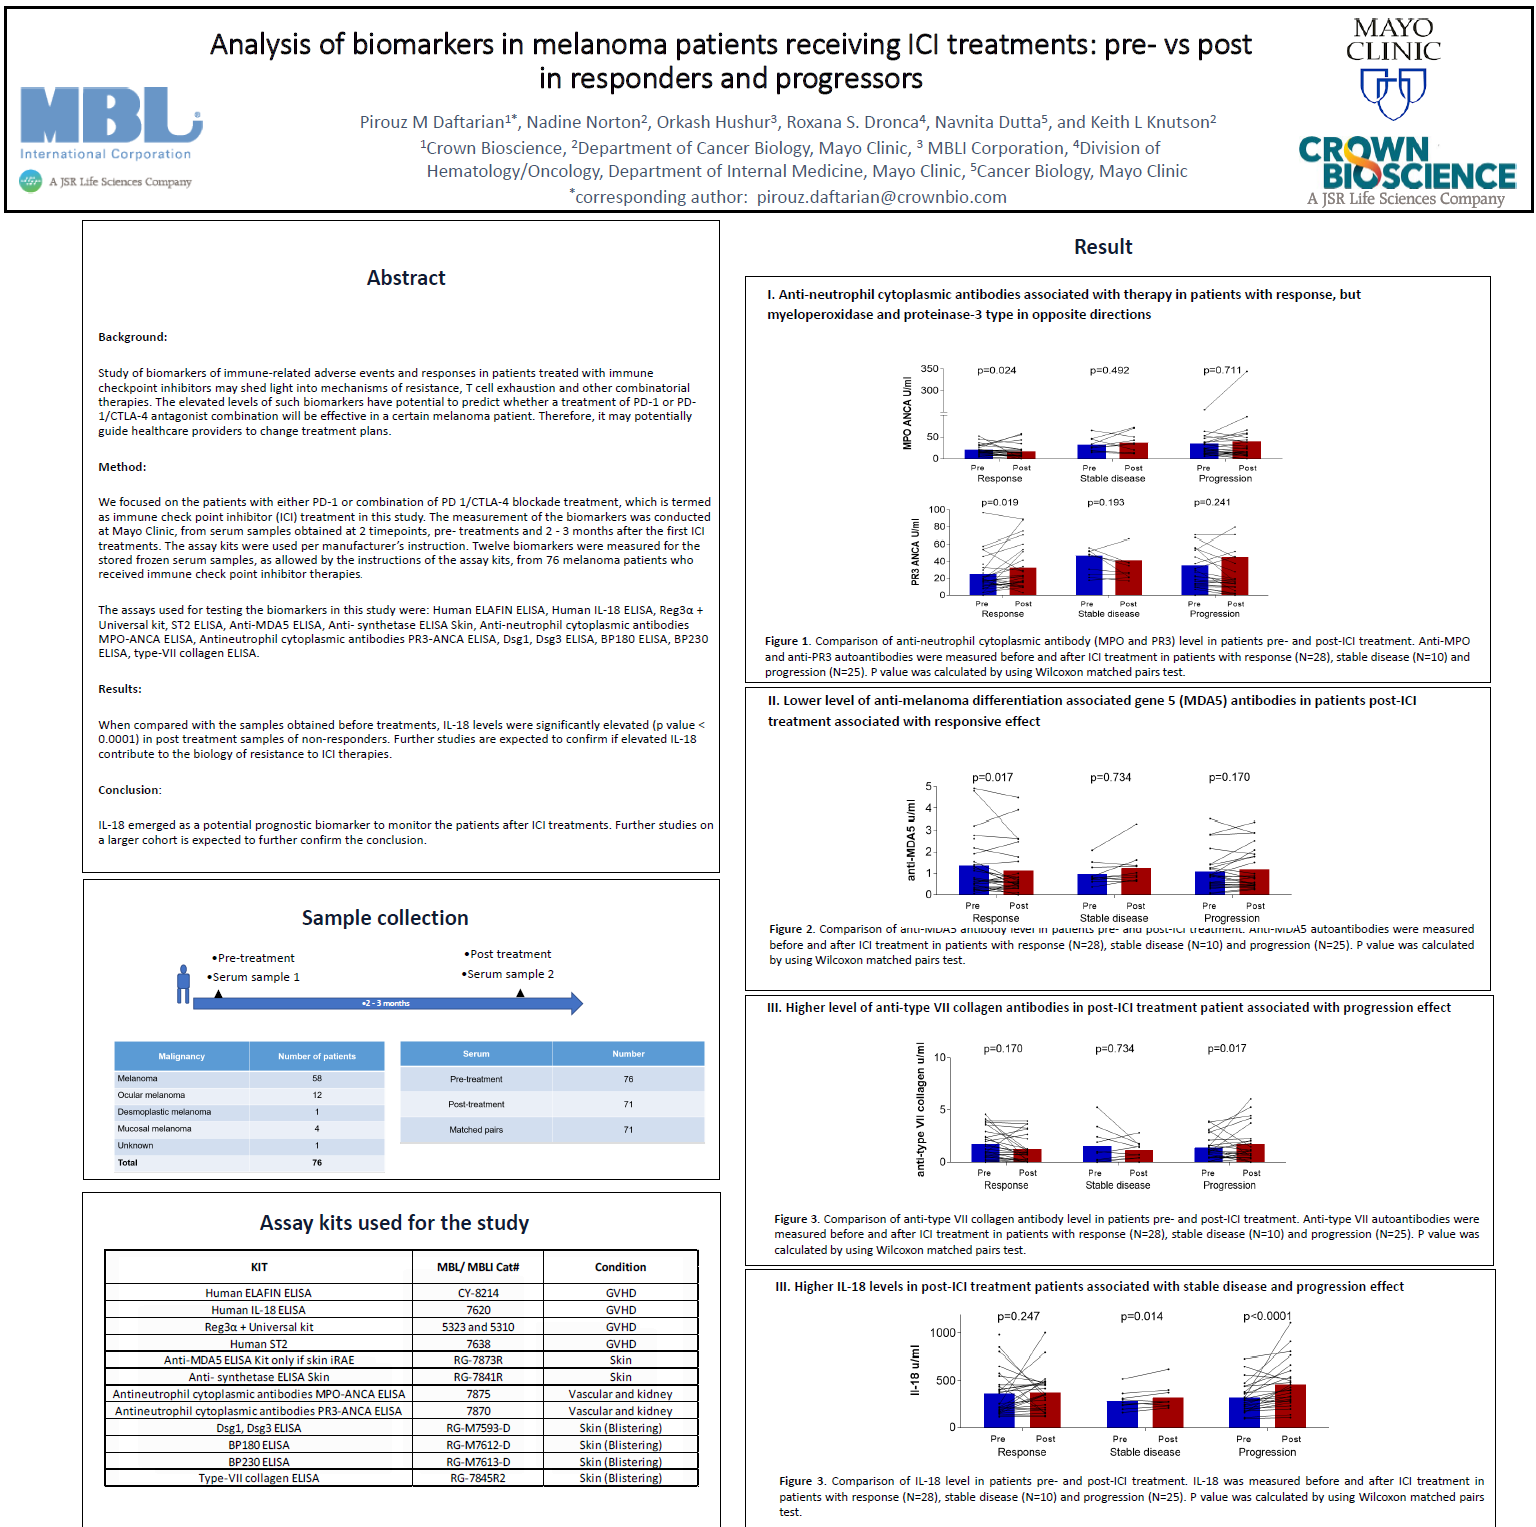 Scientific Poster: Analysis of biomarkers in melanoma patients receiving ICI treatments: pre- vs post in responders and progressors